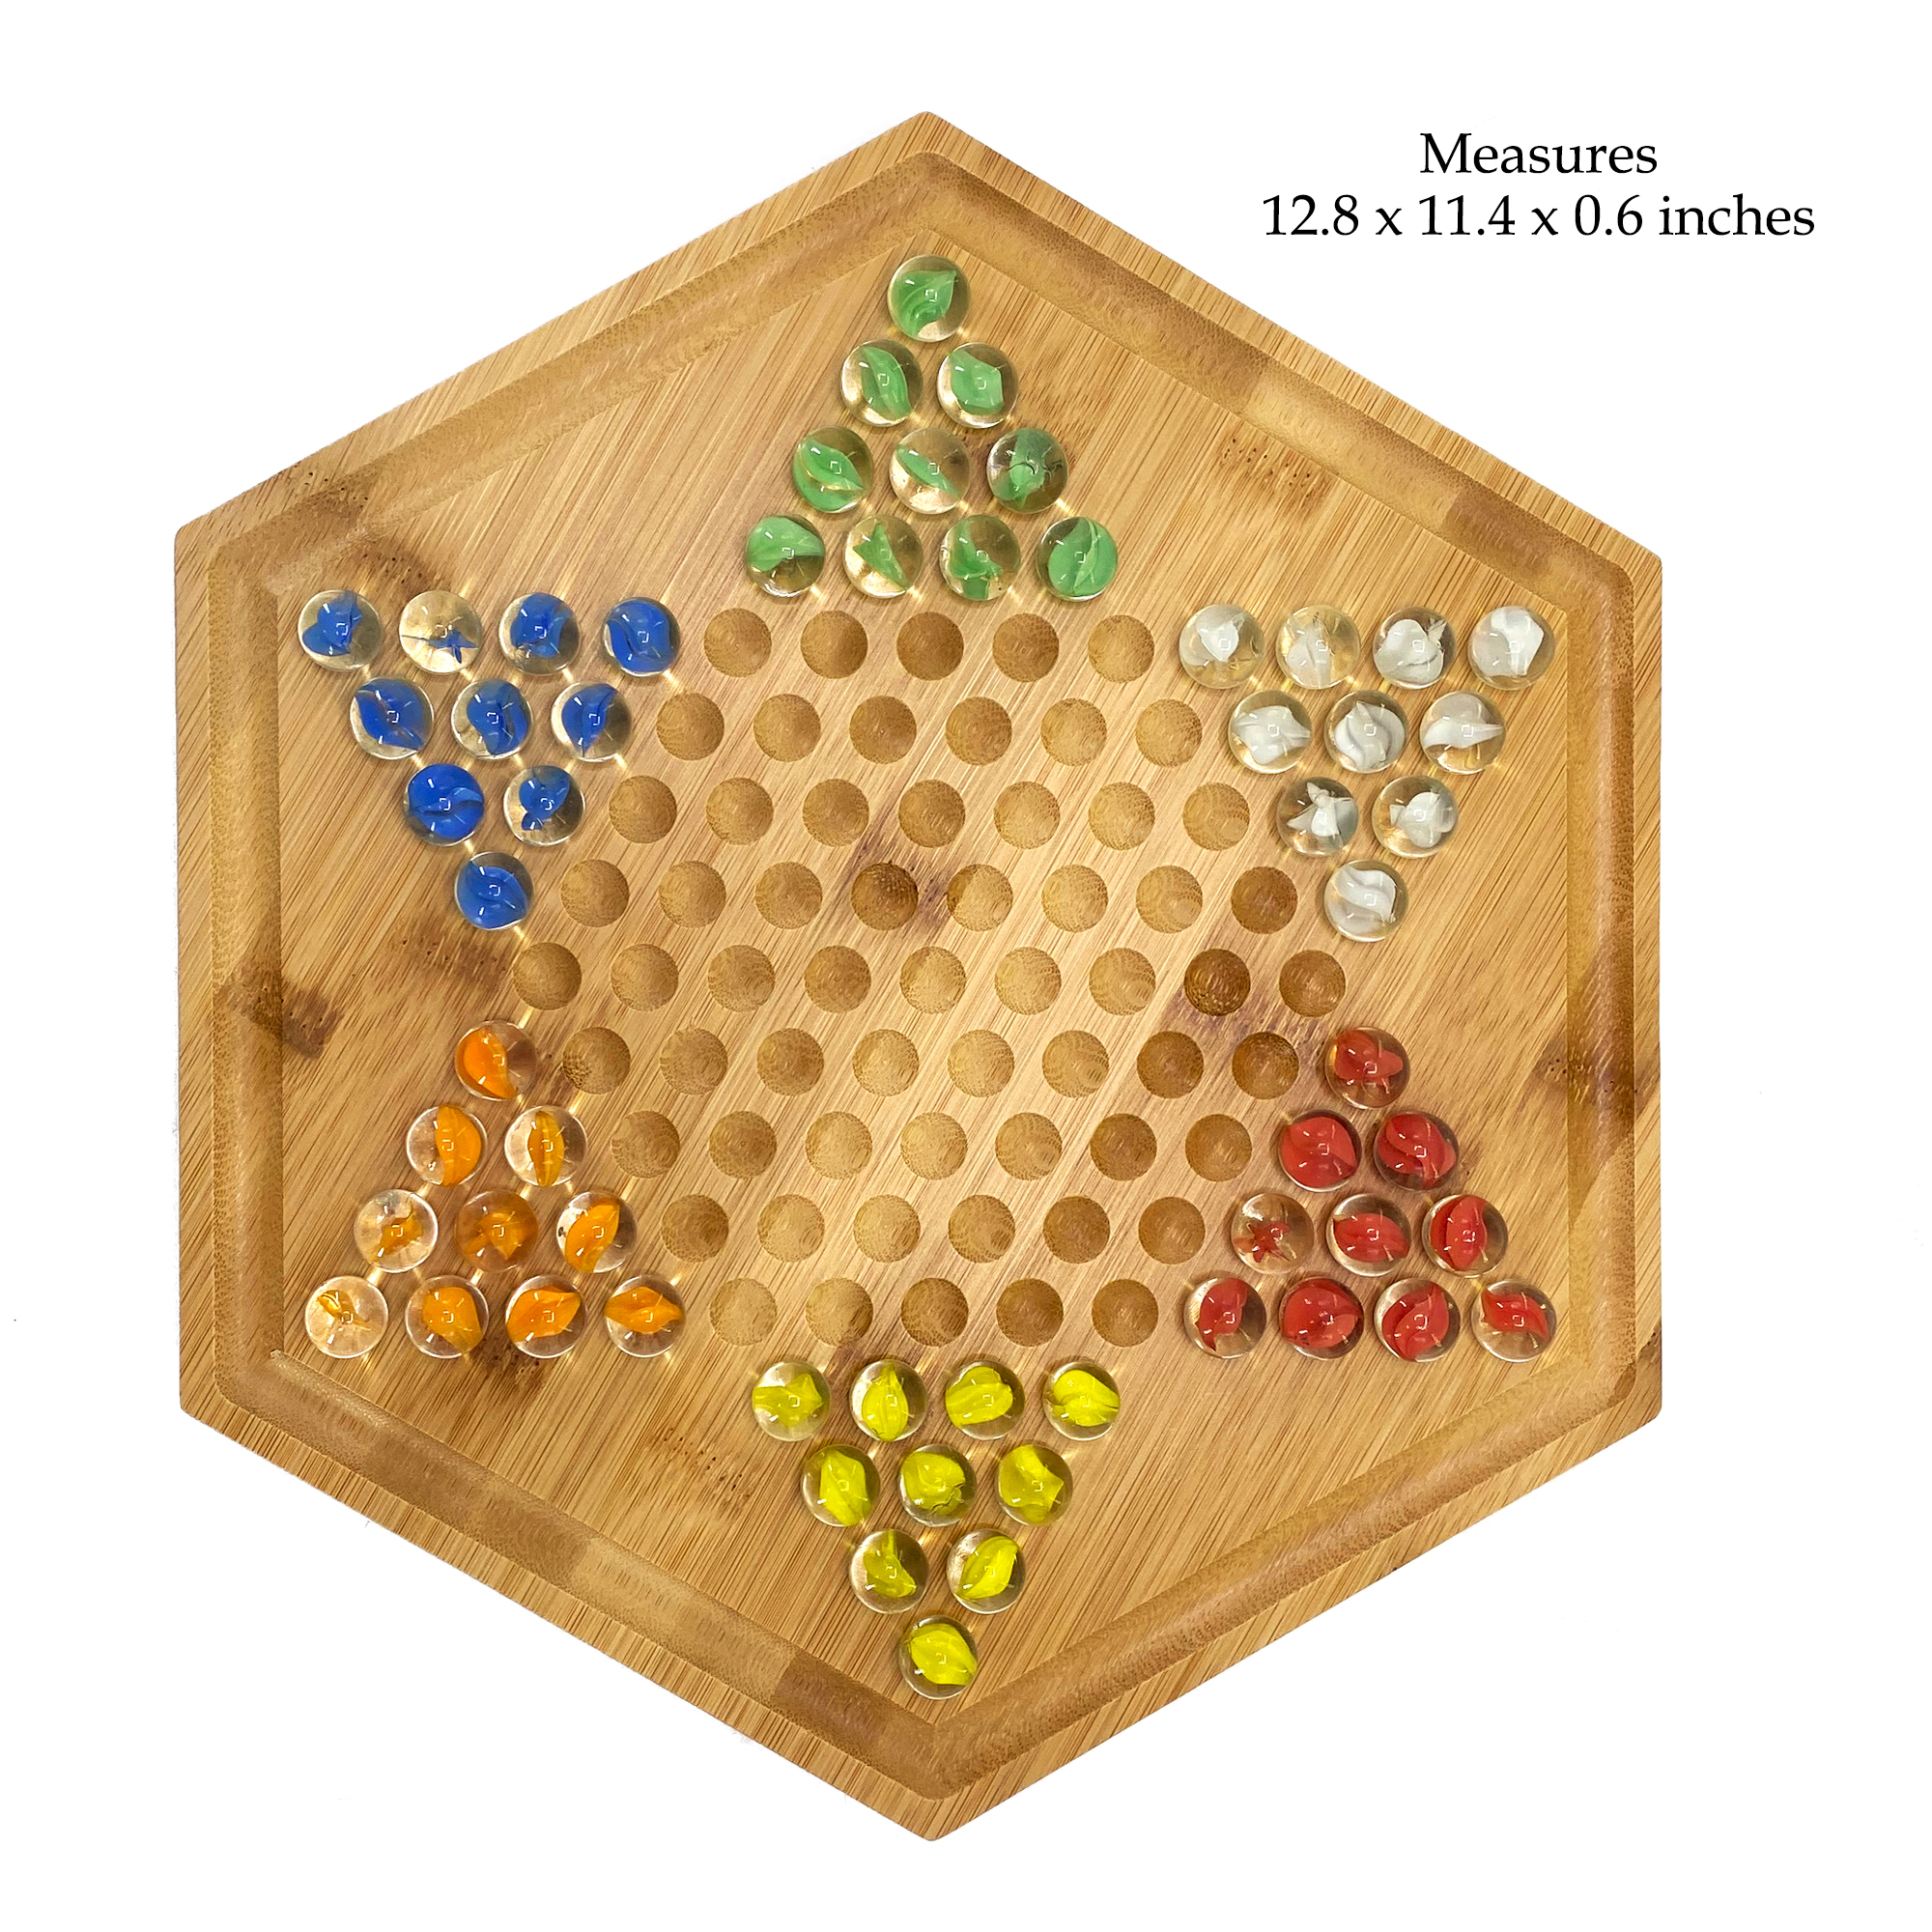 Details about   Wooden Chinese Checkers 12 Inches Board Game 6 Color Glass Marbles Family Fun 